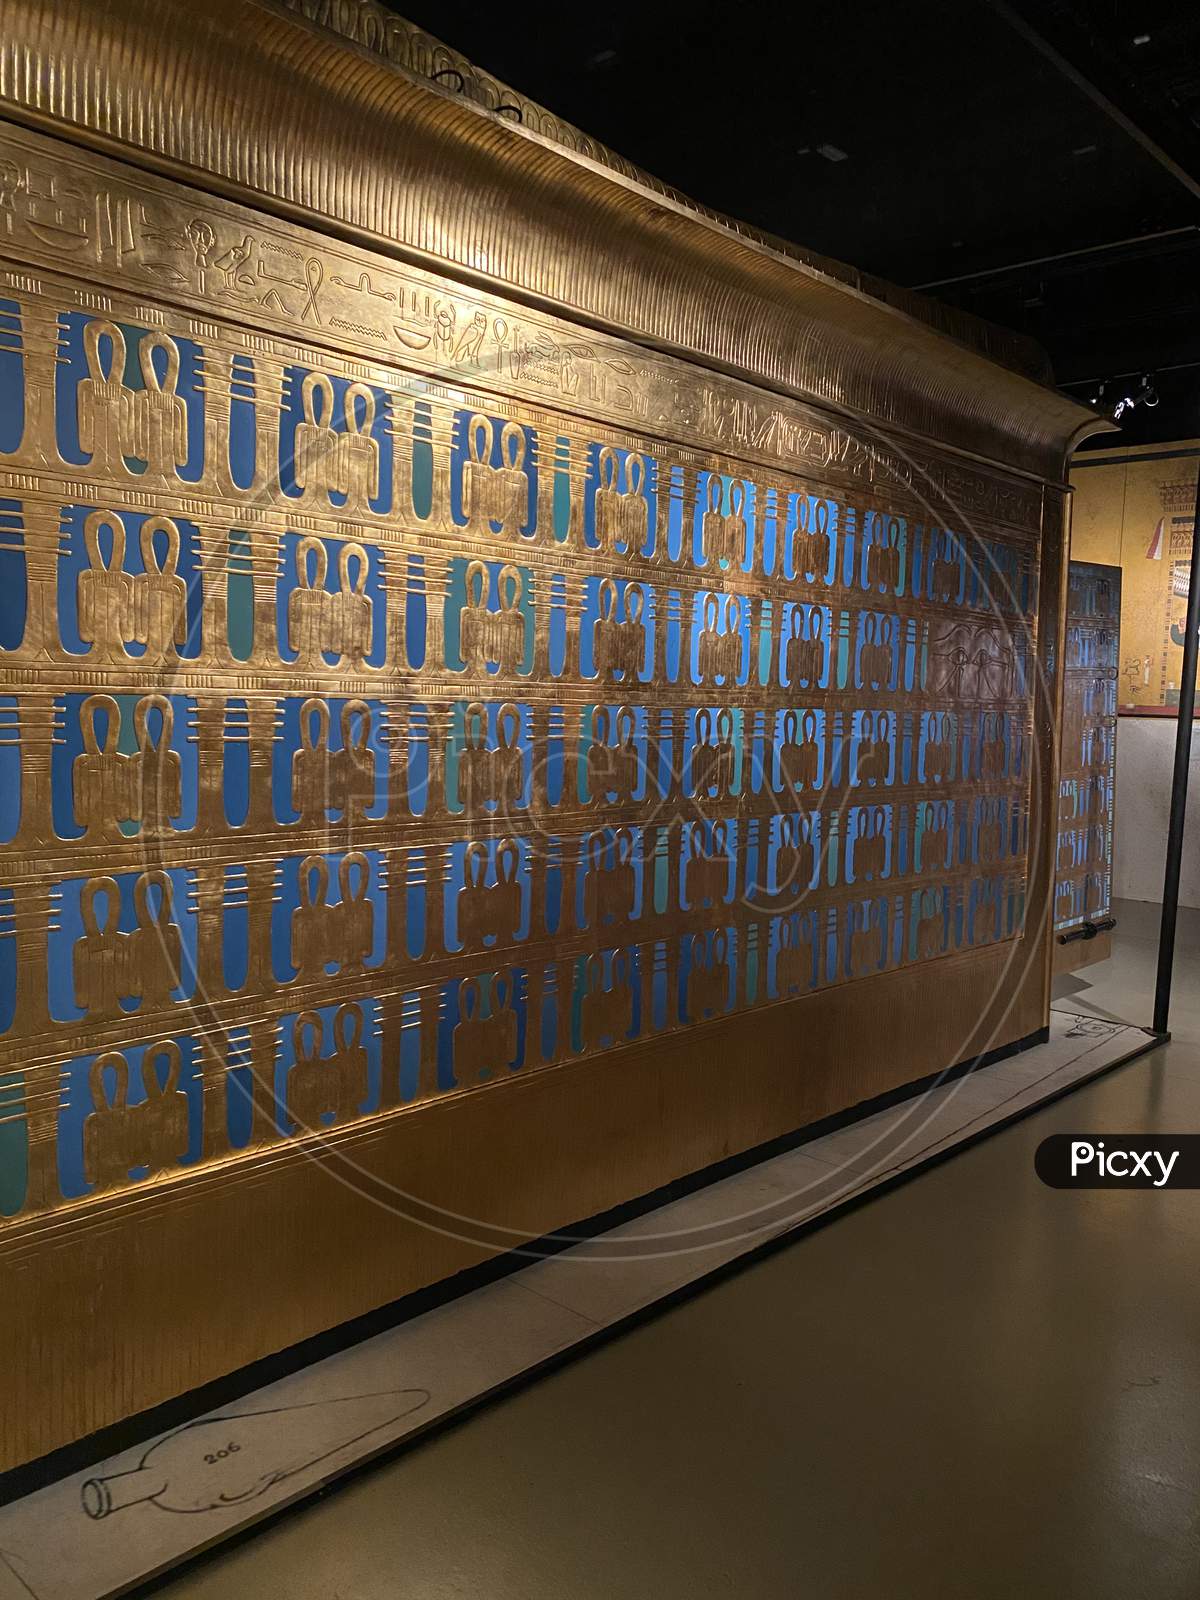 Exhibition Of Tutankhamun In Zurich During Pandemic Time. Outer Golden Shrine Containing The Mummy And Sarcophagus Of Tutankhamen.